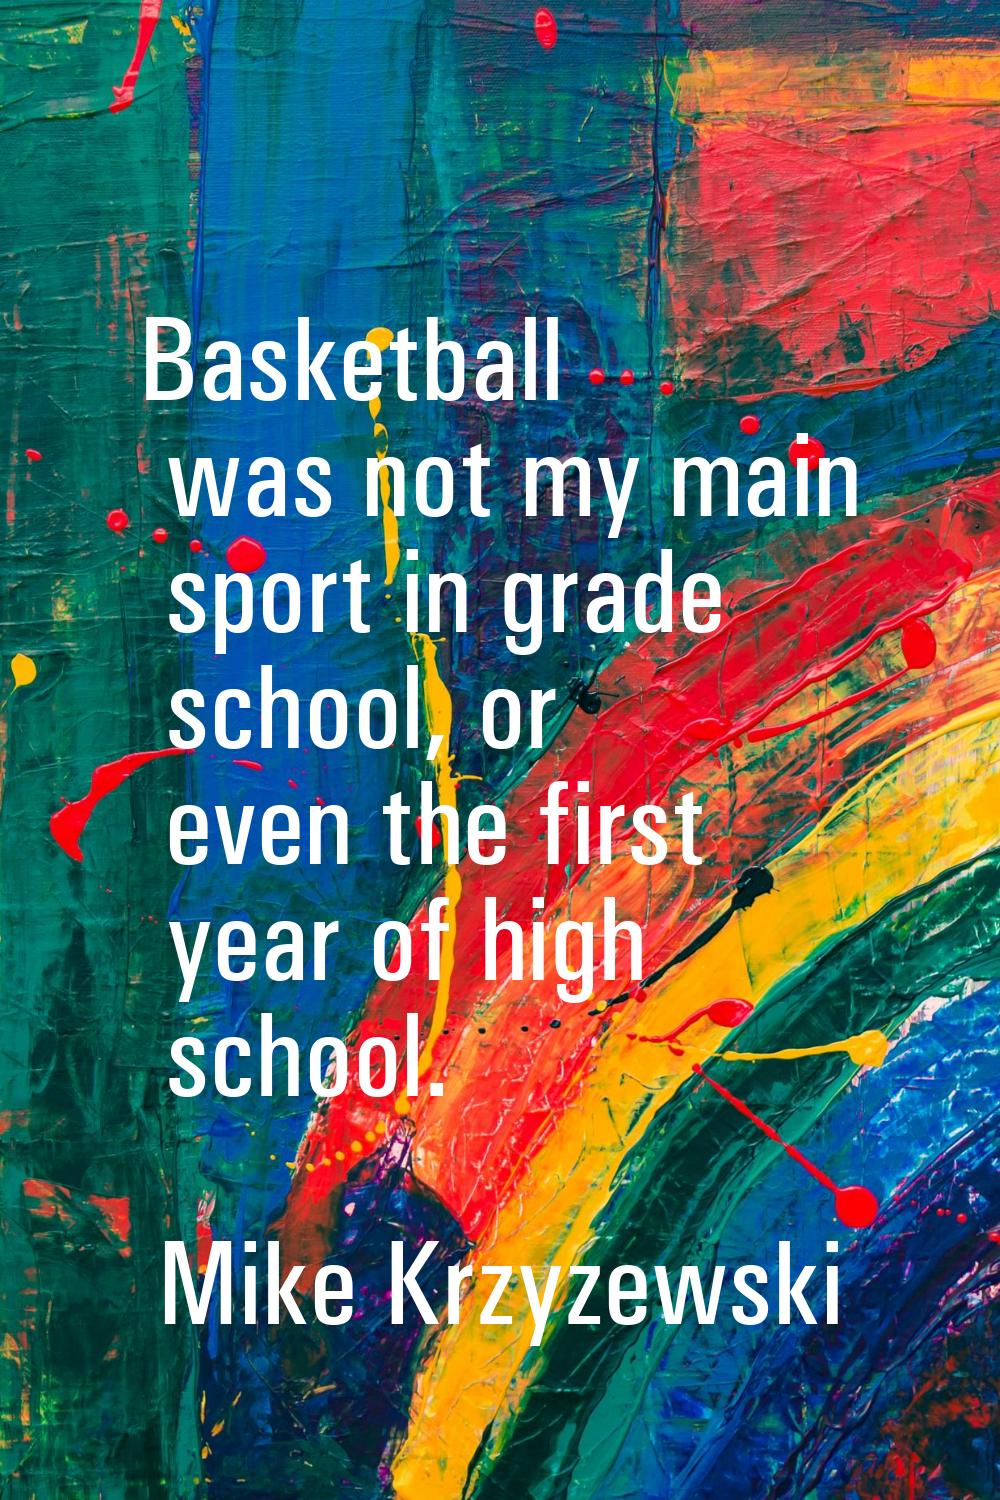 Basketball was not my main sport in grade school, or even the first year of high school.